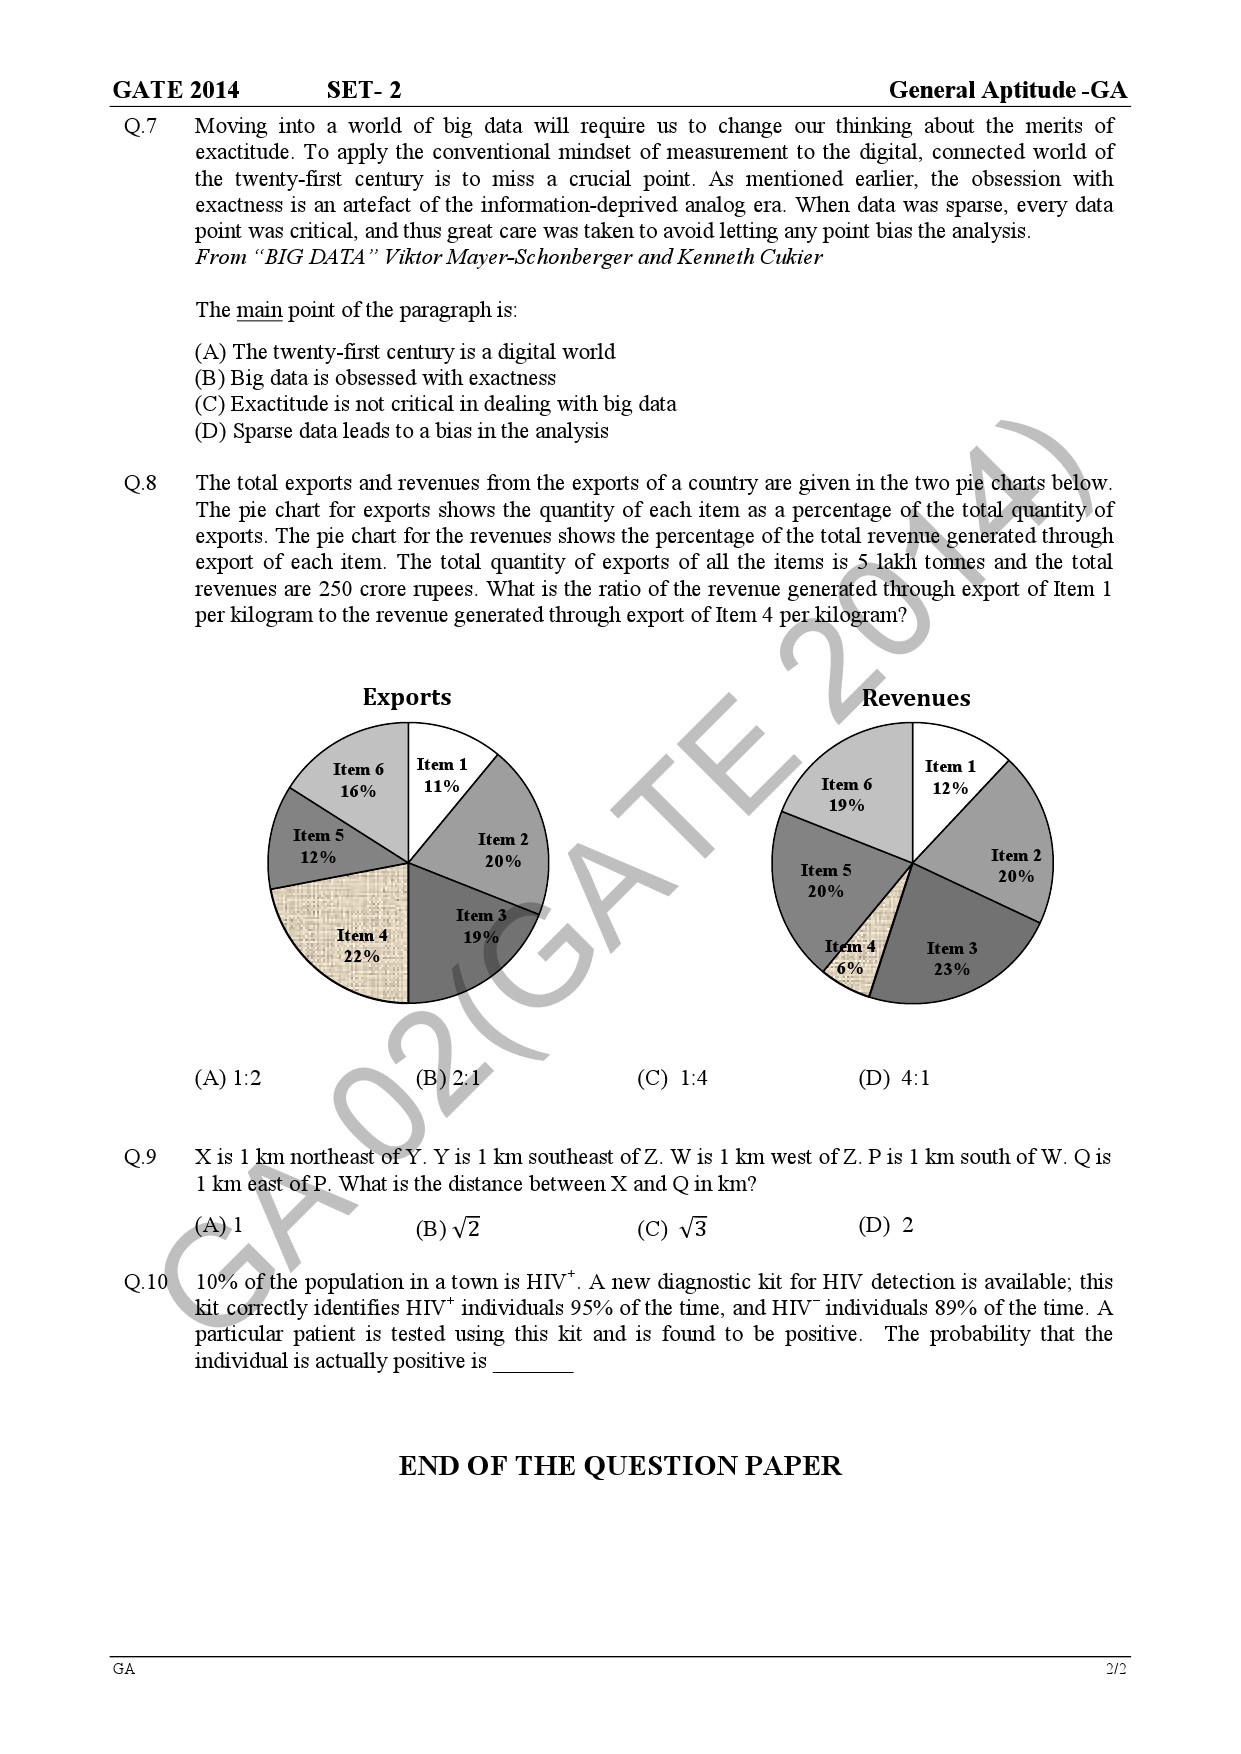 GATE Exam Question Paper 2014 Mining Engineering 6